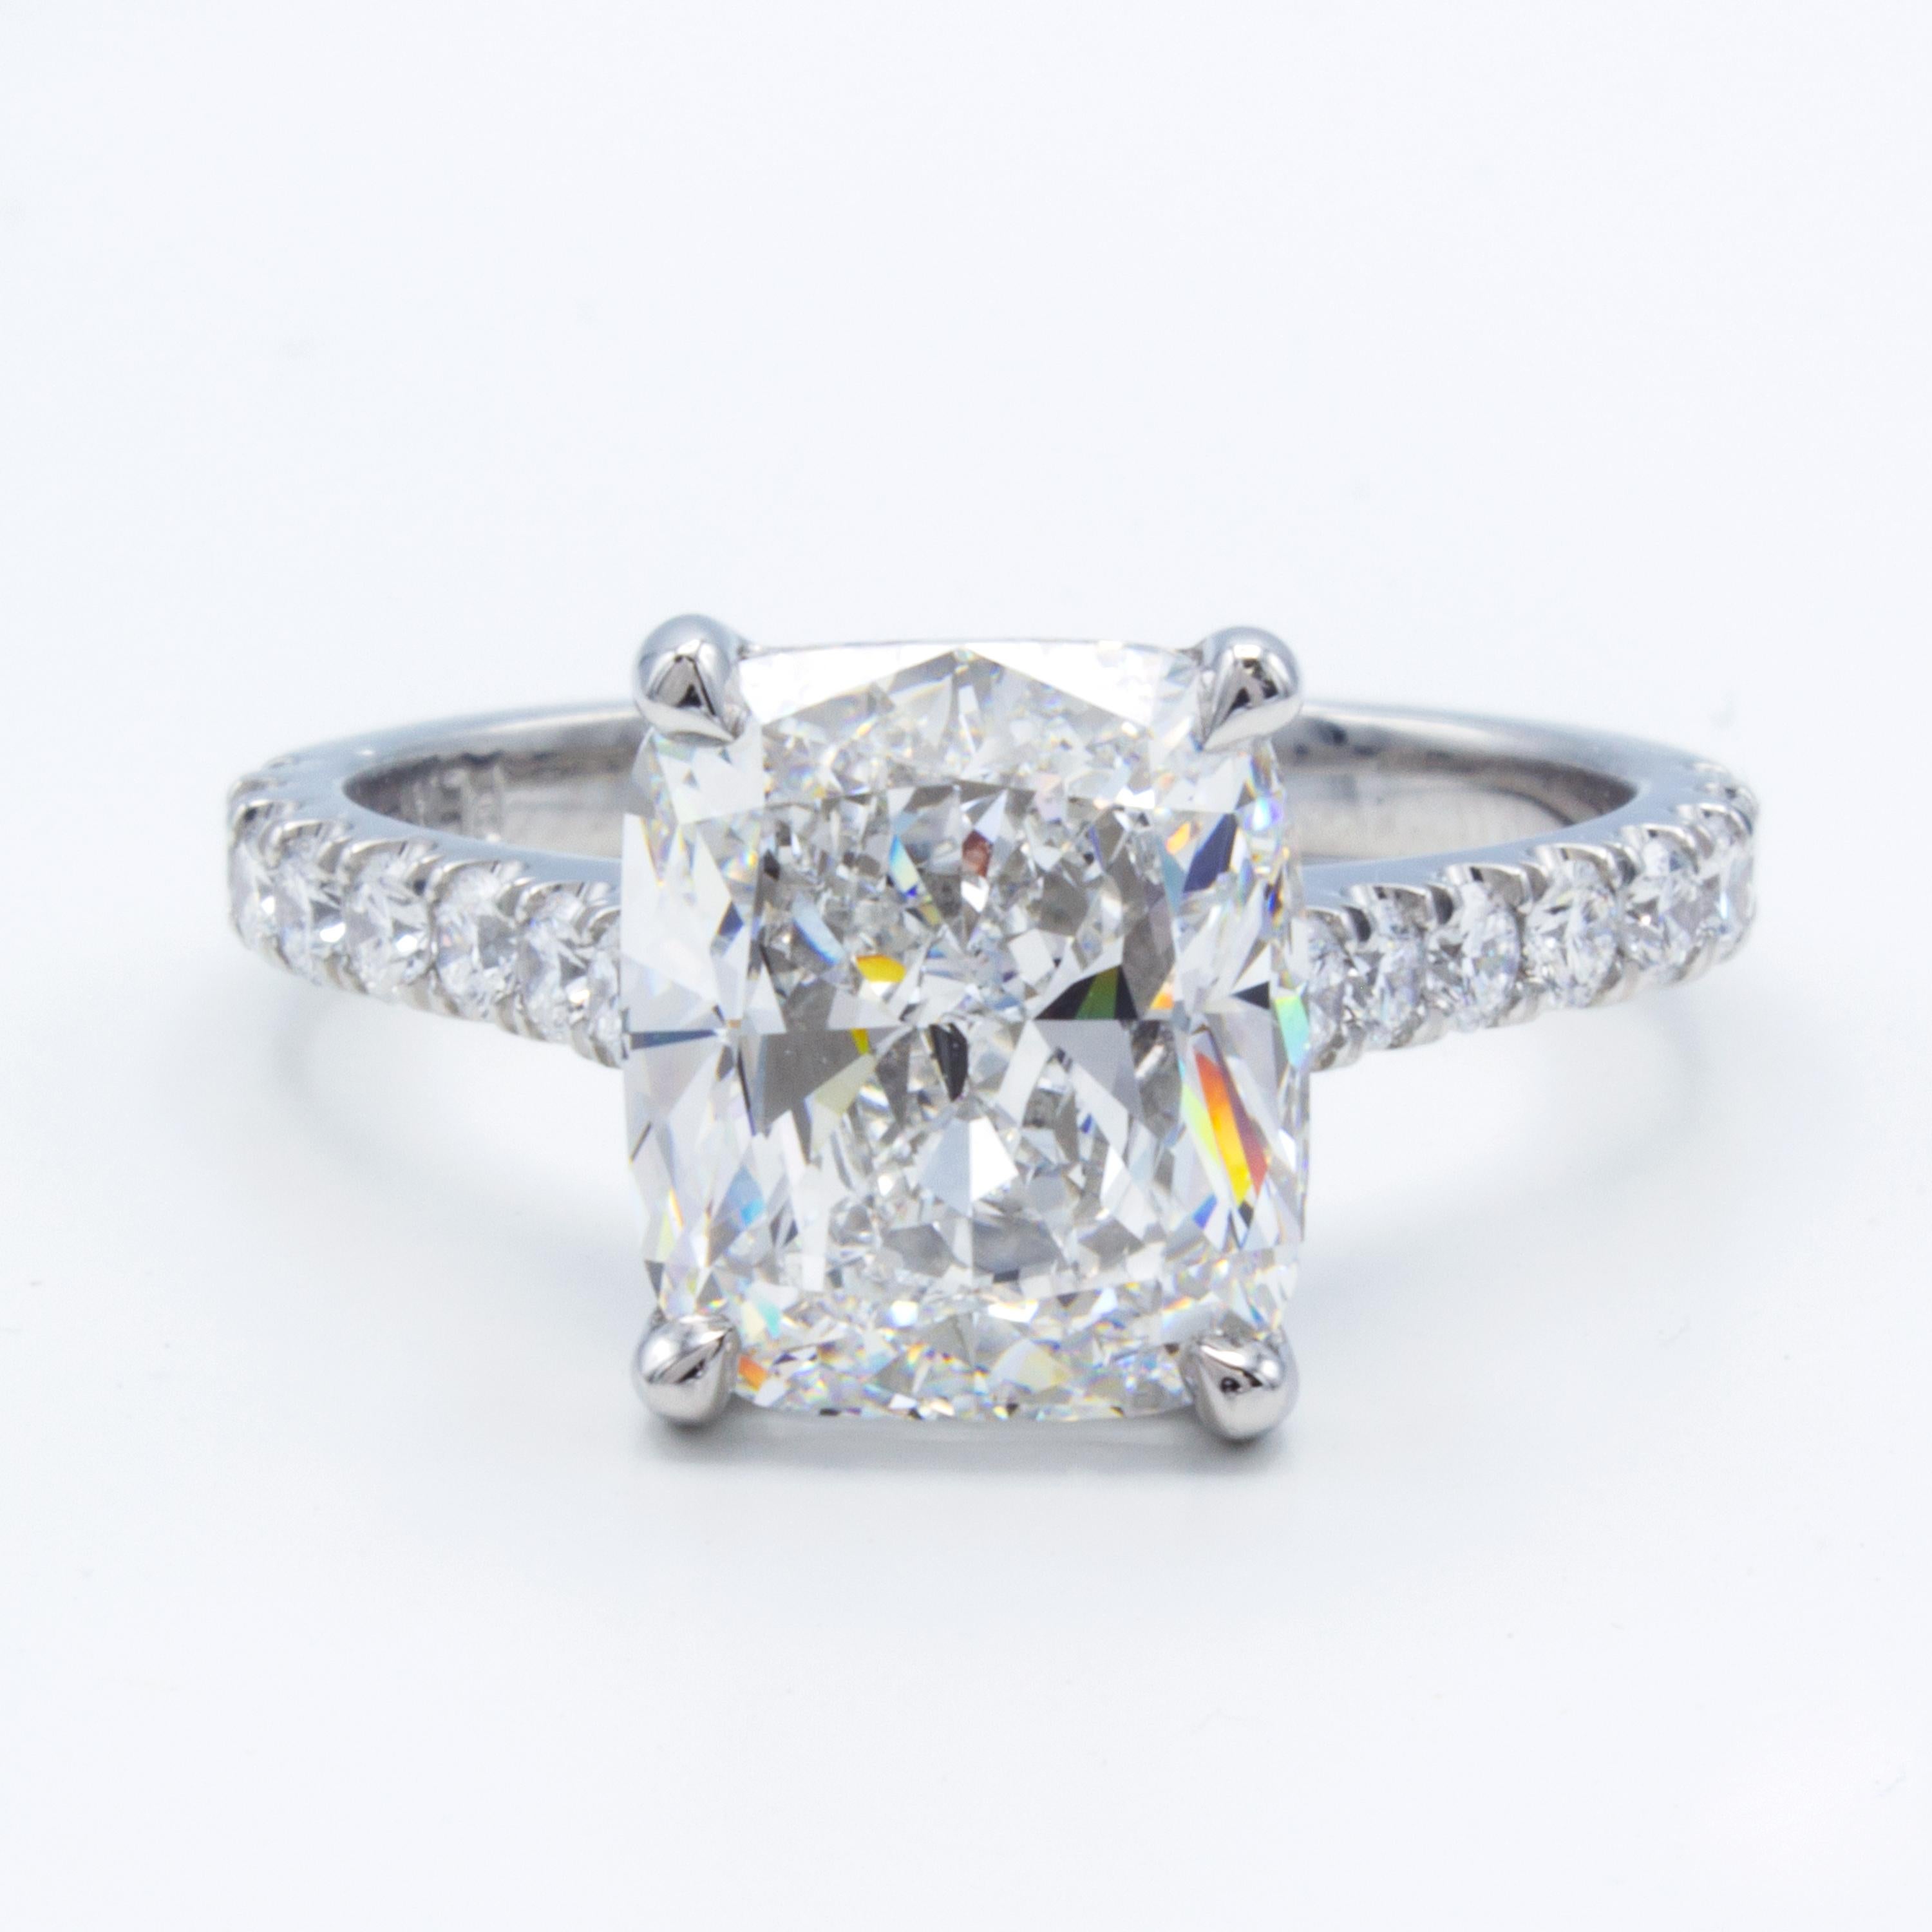 Rosenberg Diamonds & Co. 3.76 carat Cushion shape E color VVS2 Clarity is accompanied by a GIA certificate. This spectacular collection color is full brilliance that is set in a handmade platinum setting with beautiful round micro pave three